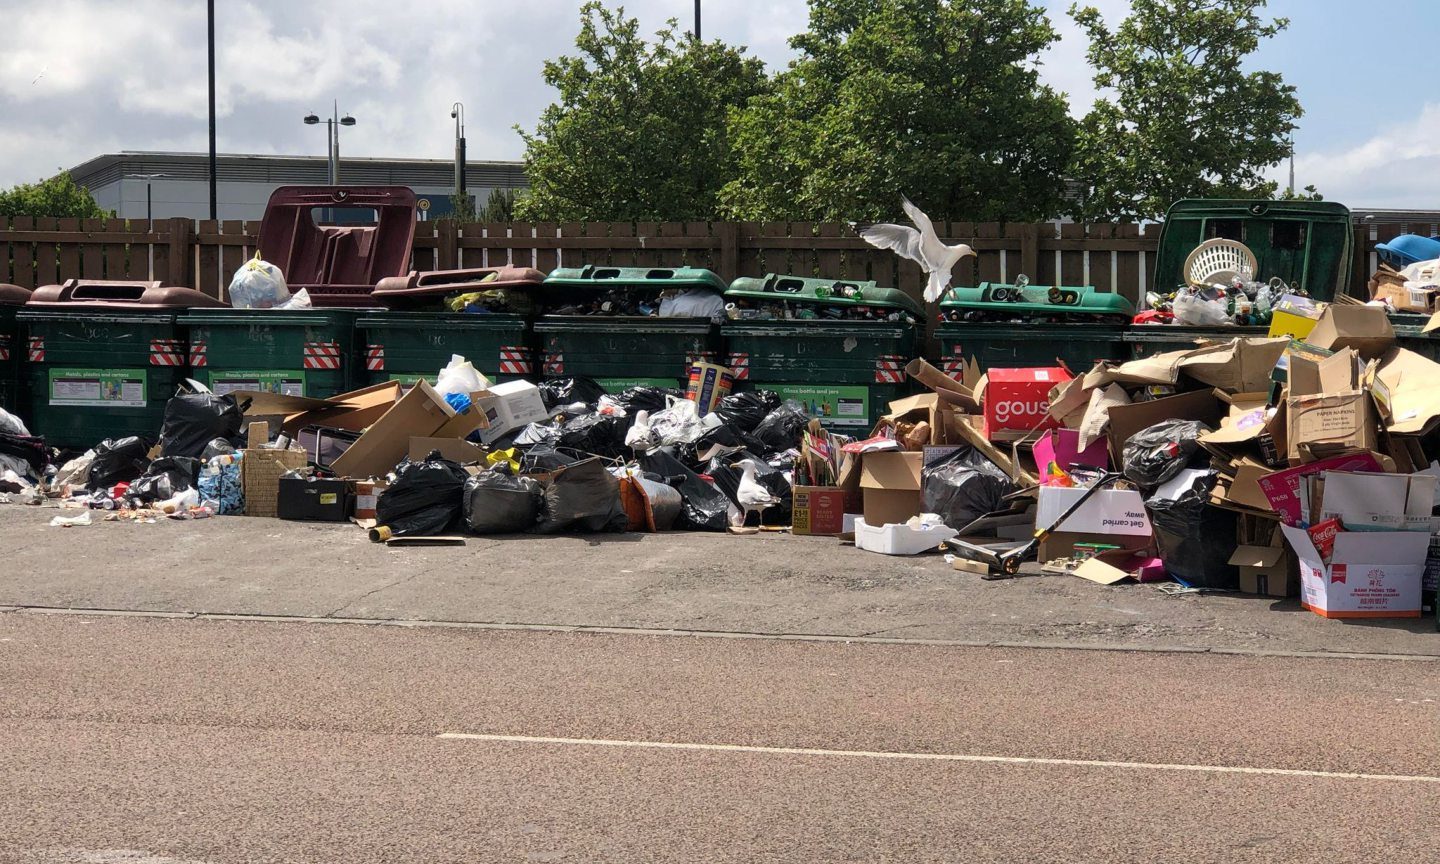 The recycling area at Kingsway West Retail Park.